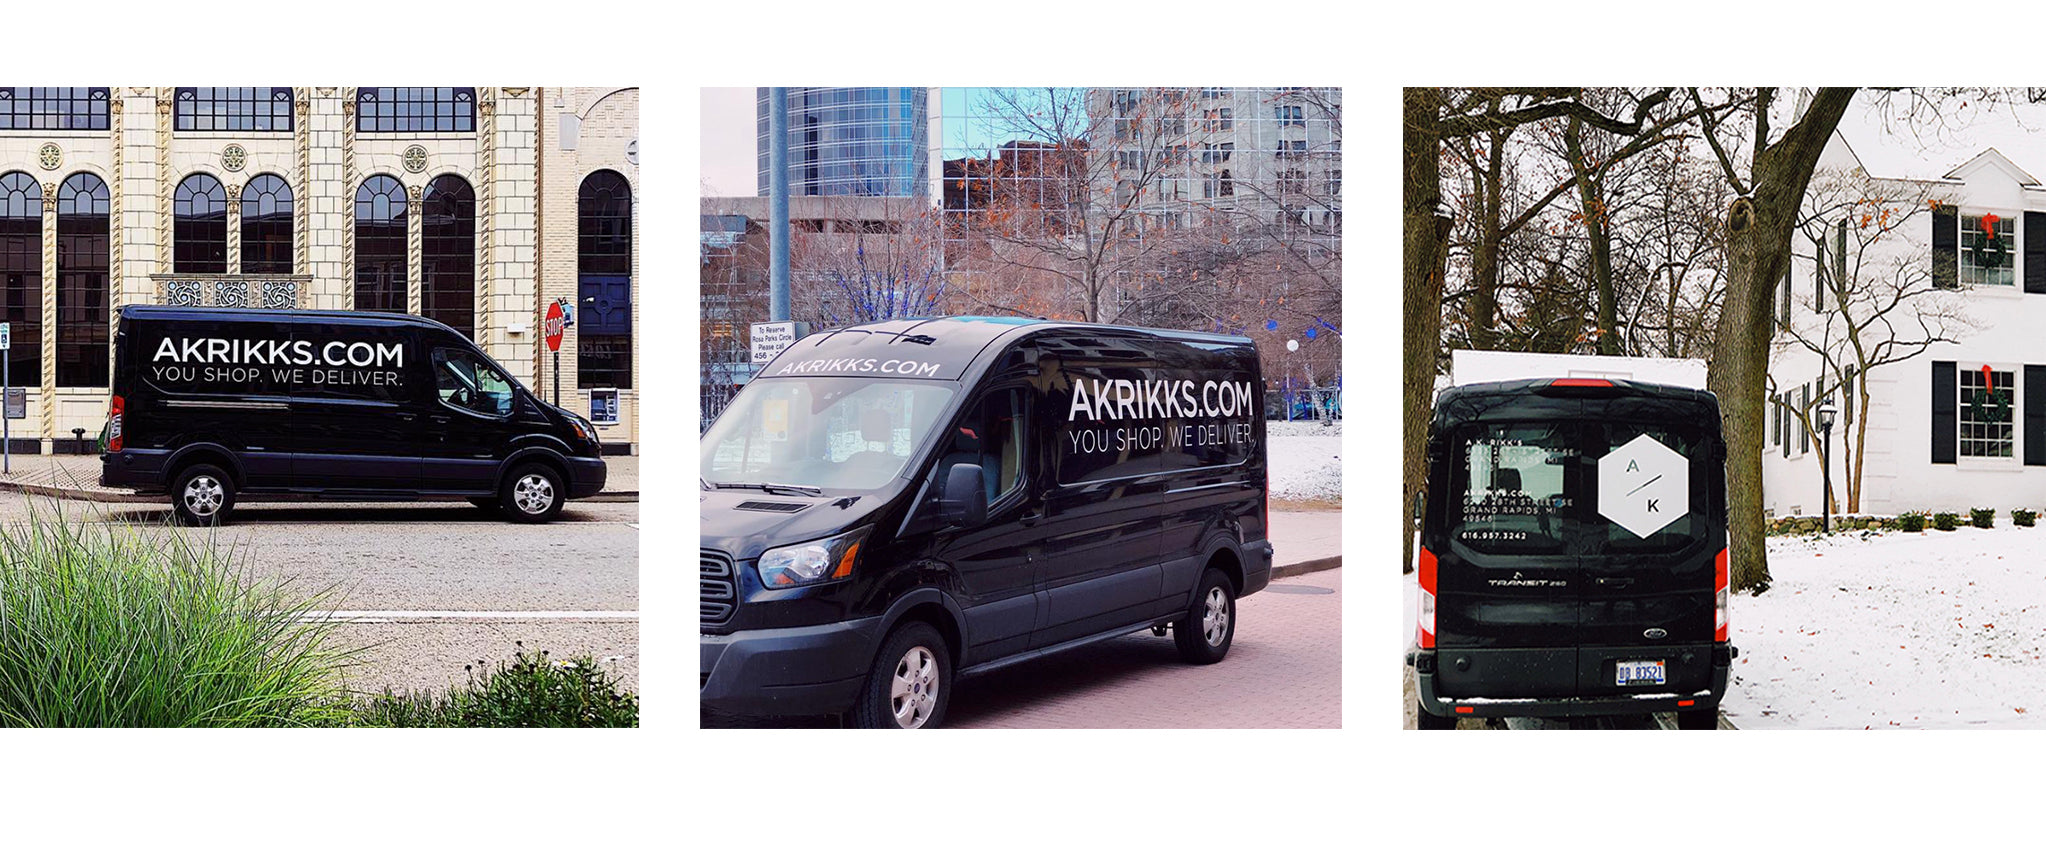 A.K. Rikk's Local Delivery Van: You Shop, We Deliver in Grand Rapids, Michigan